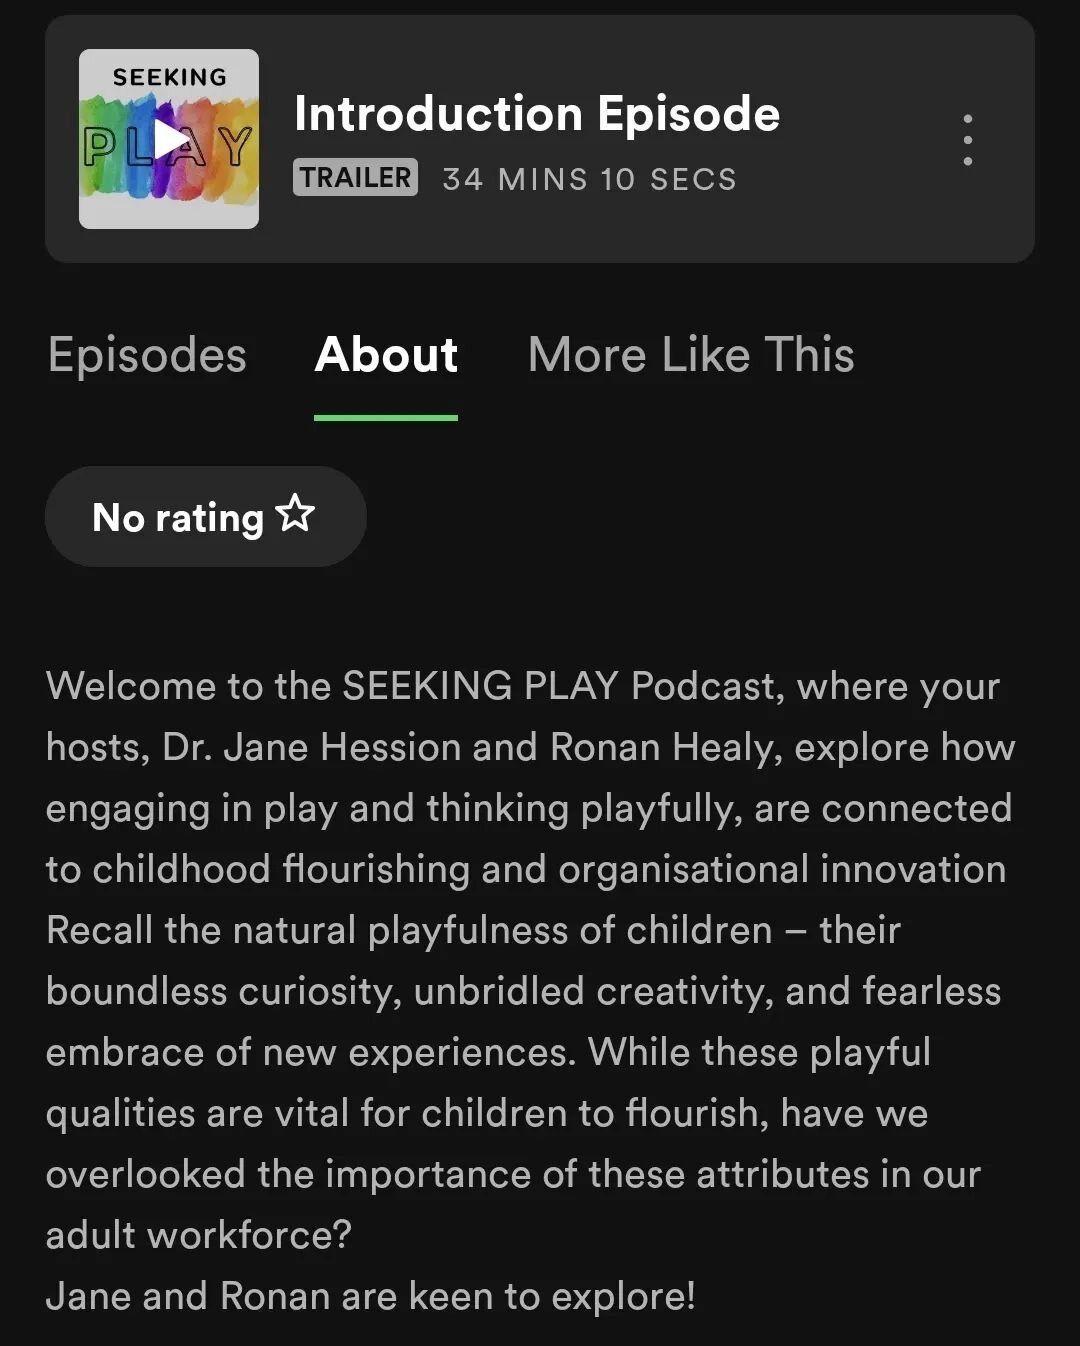 Our little playful podcast is available on Spotify!